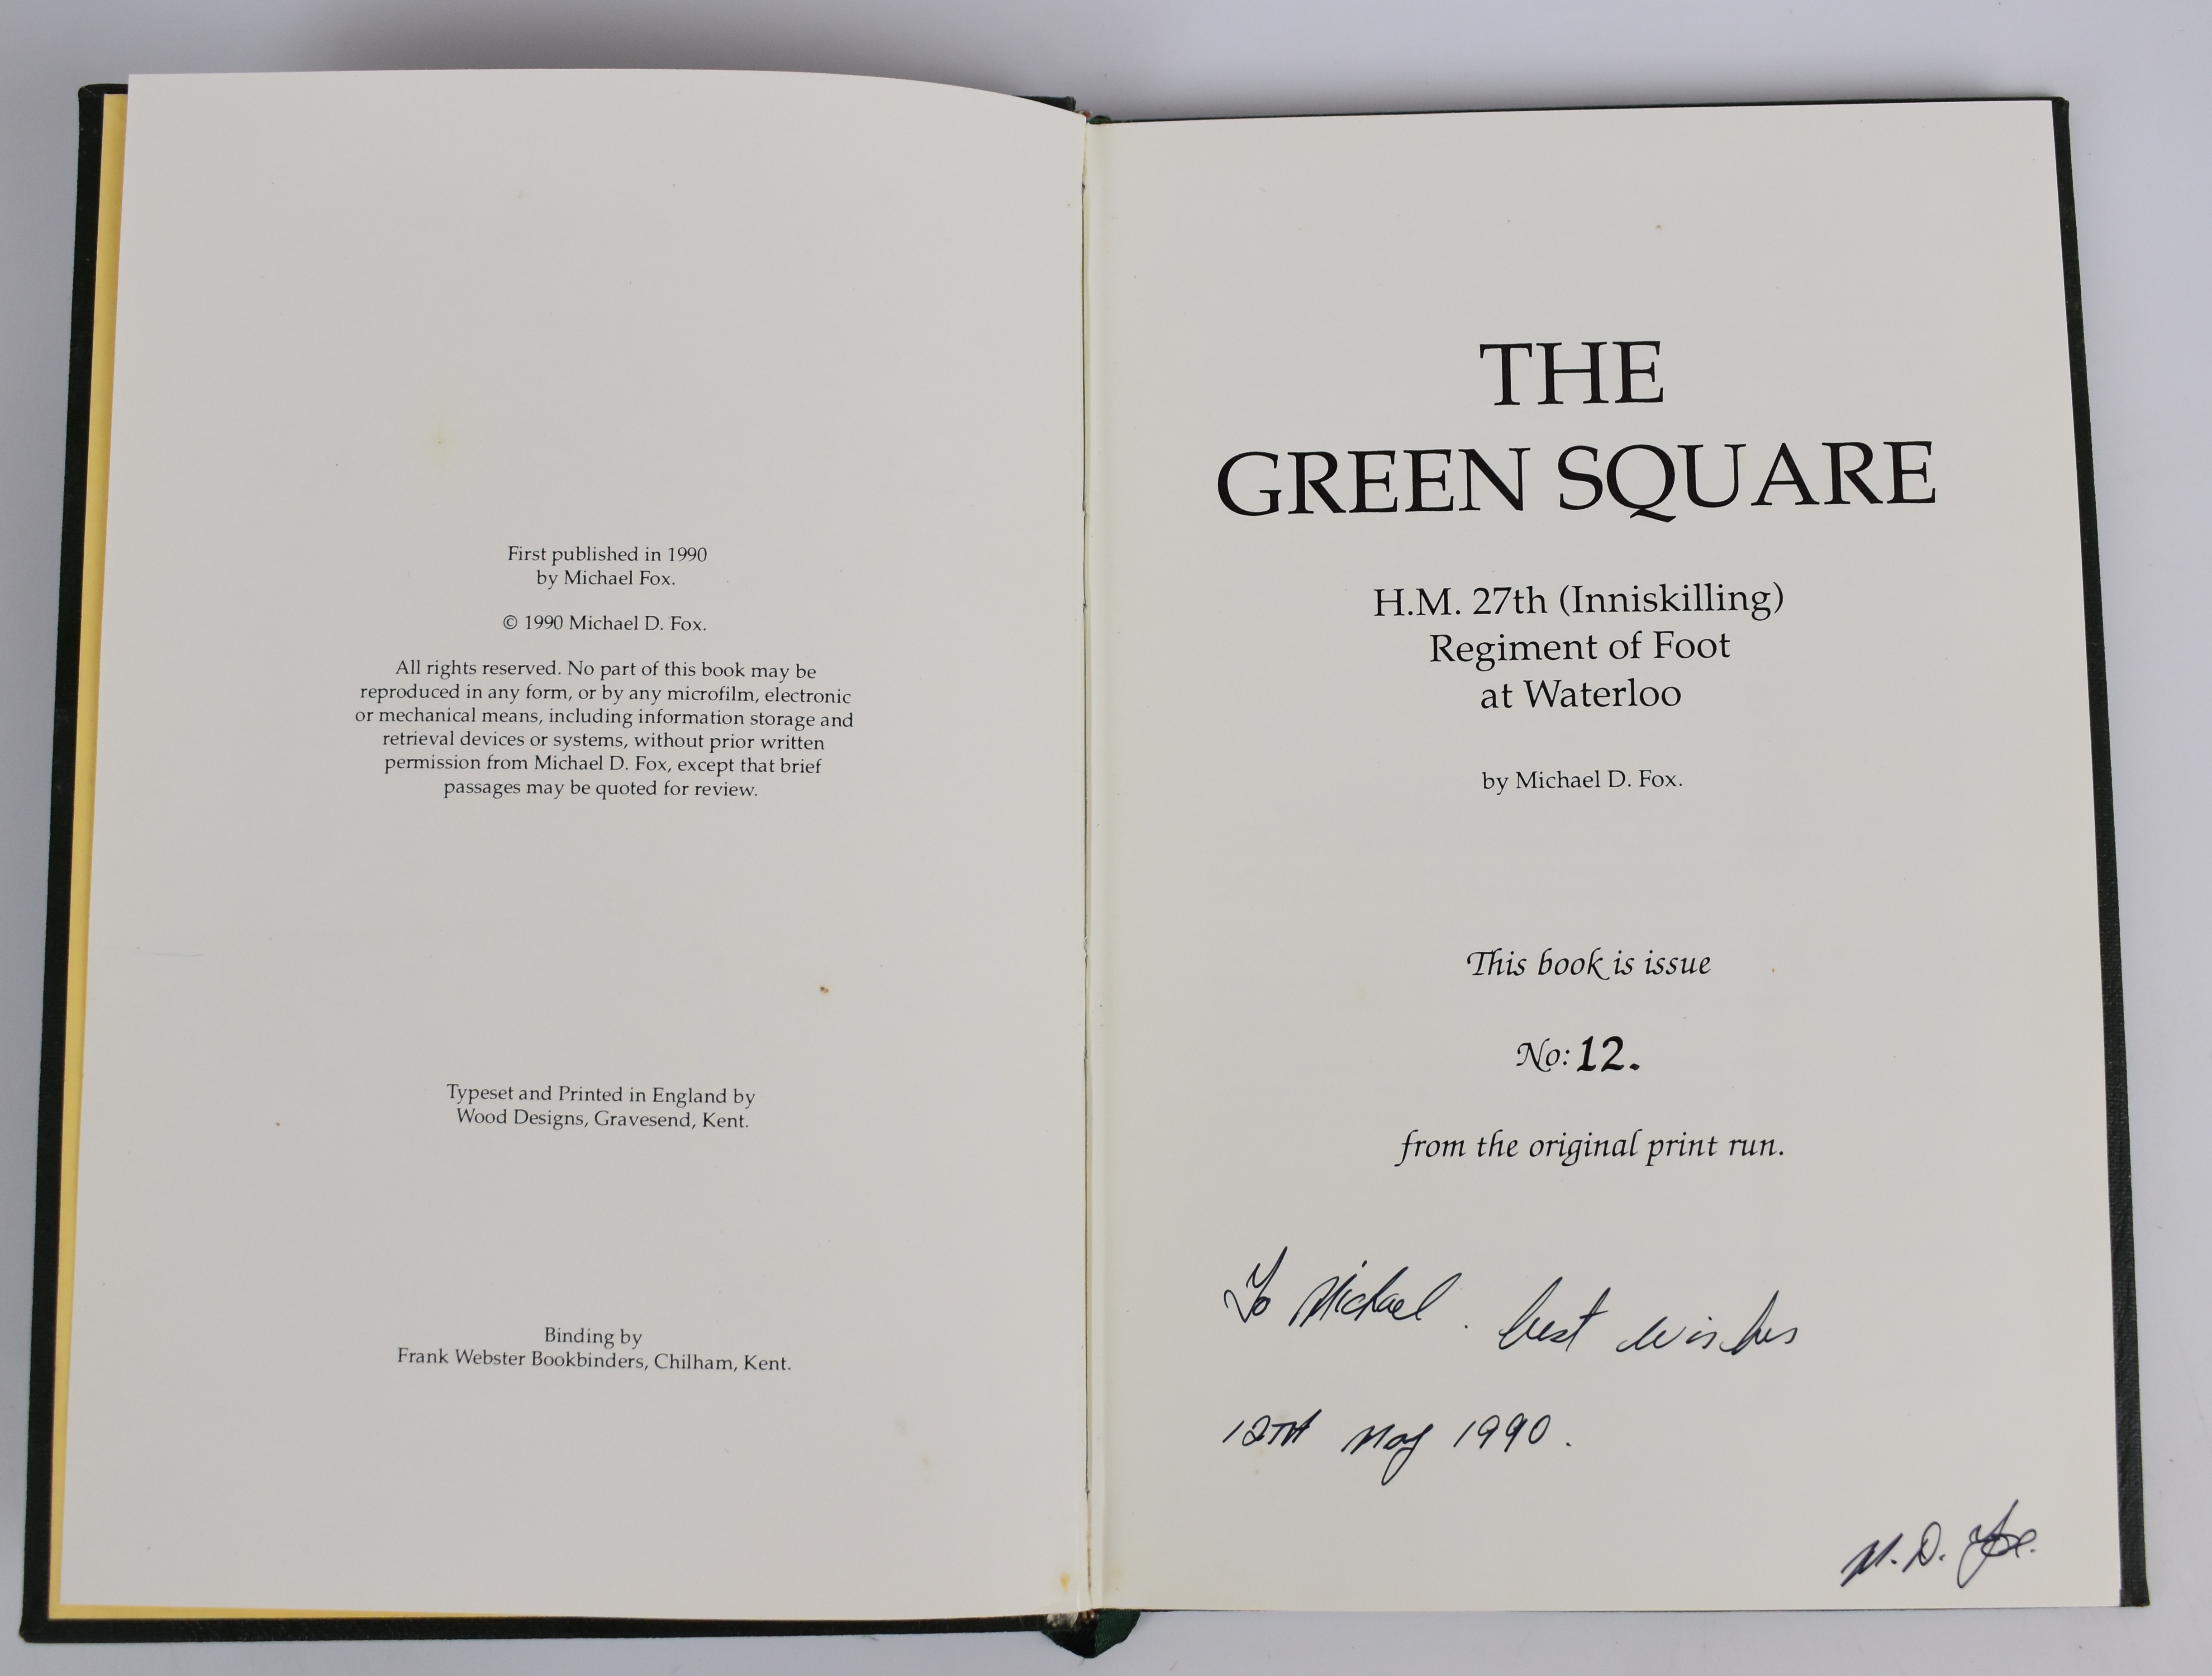 'The Green Square' book of the 27th (Inniskilling) Regiment of Foot and Waterloo by Michael D Fox, - Image 2 of 3